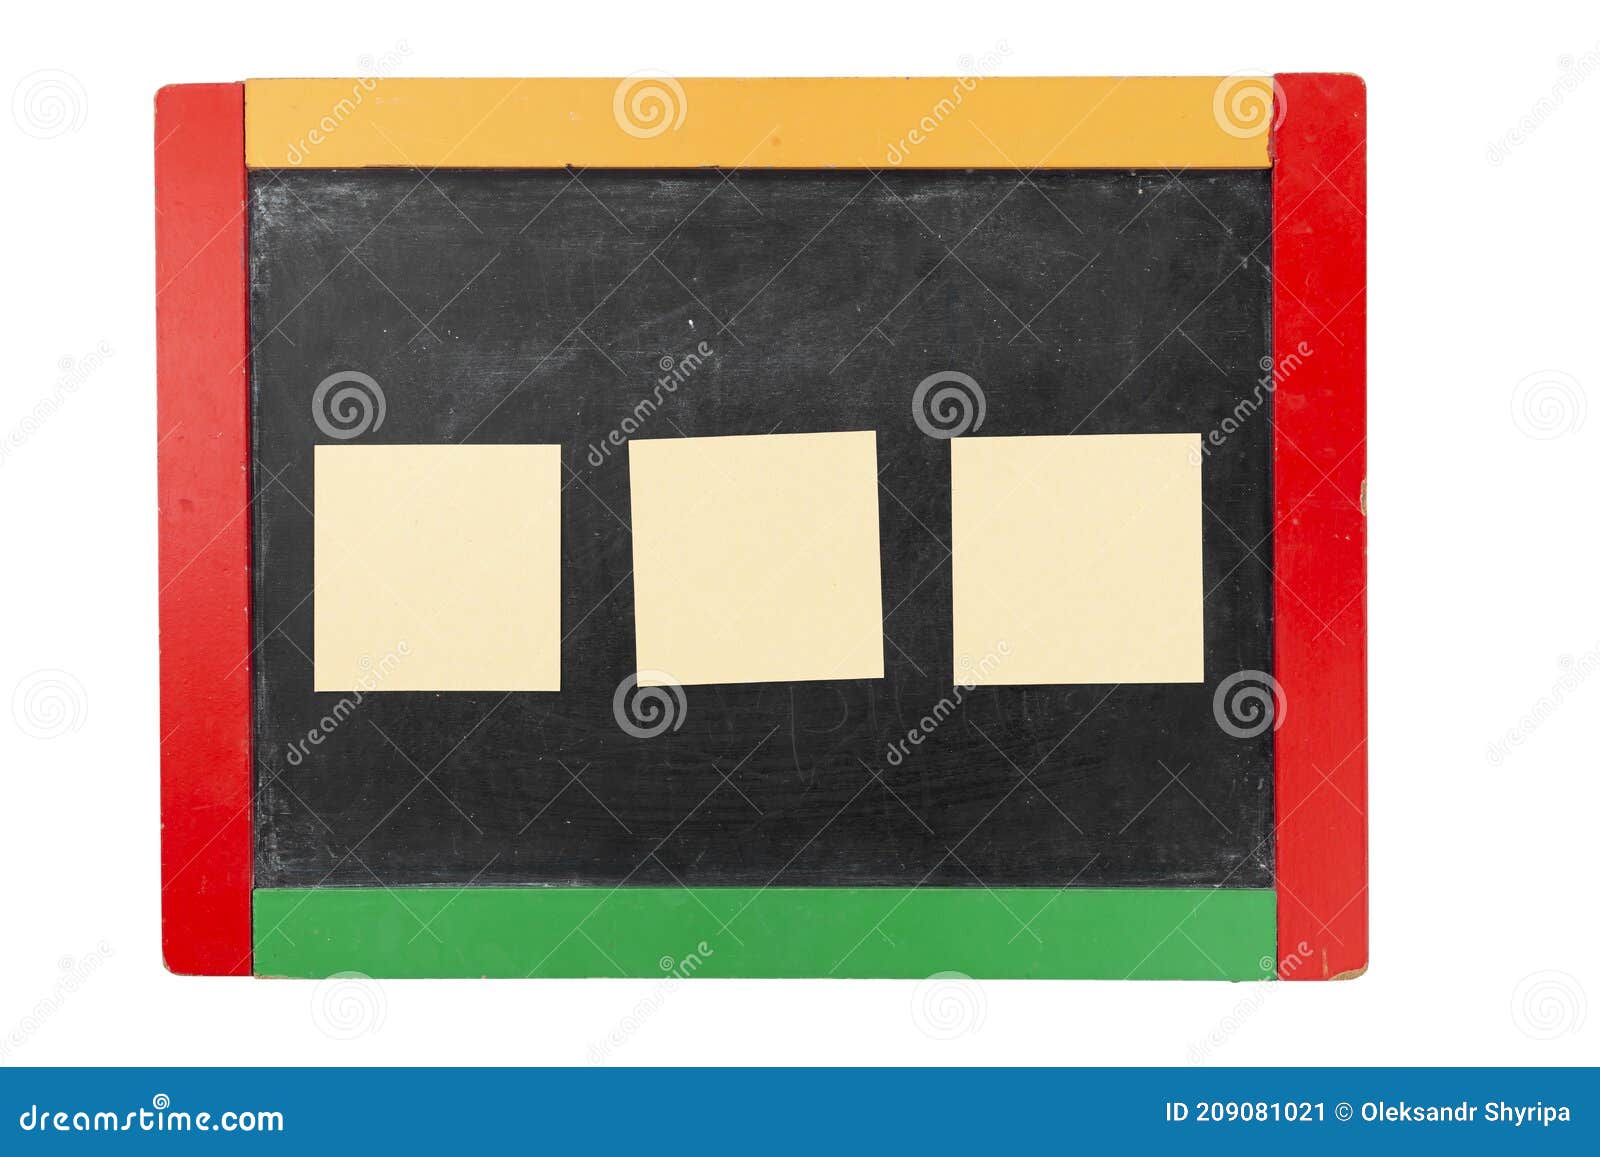 School Board for Drawing with Chalk with Paper Stickers Stock Image ...